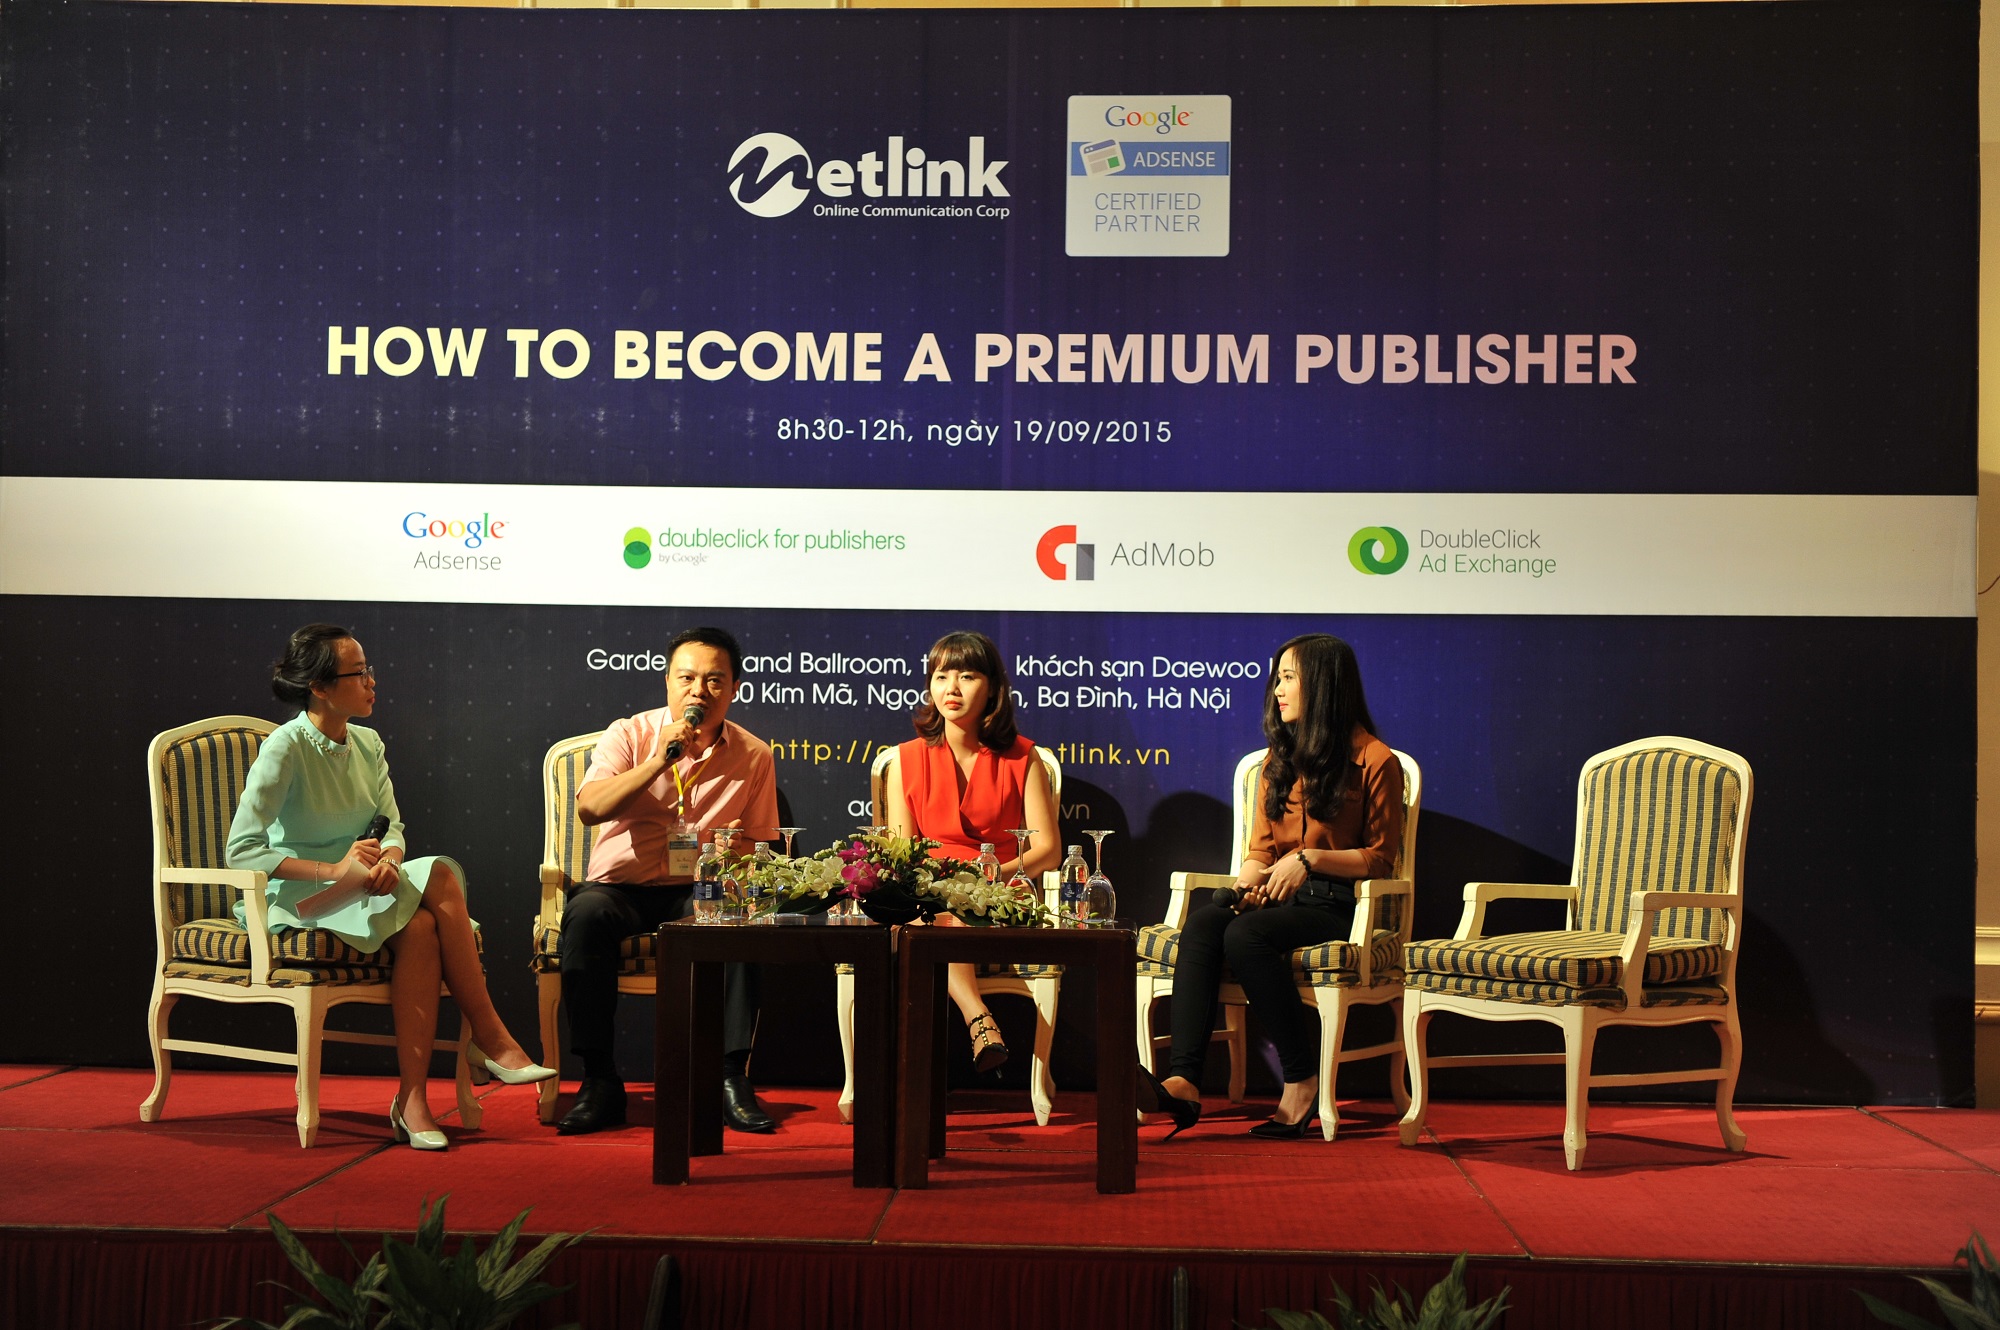 The seminar “How to Become a Premium Publisher” at Daewoo Hotel